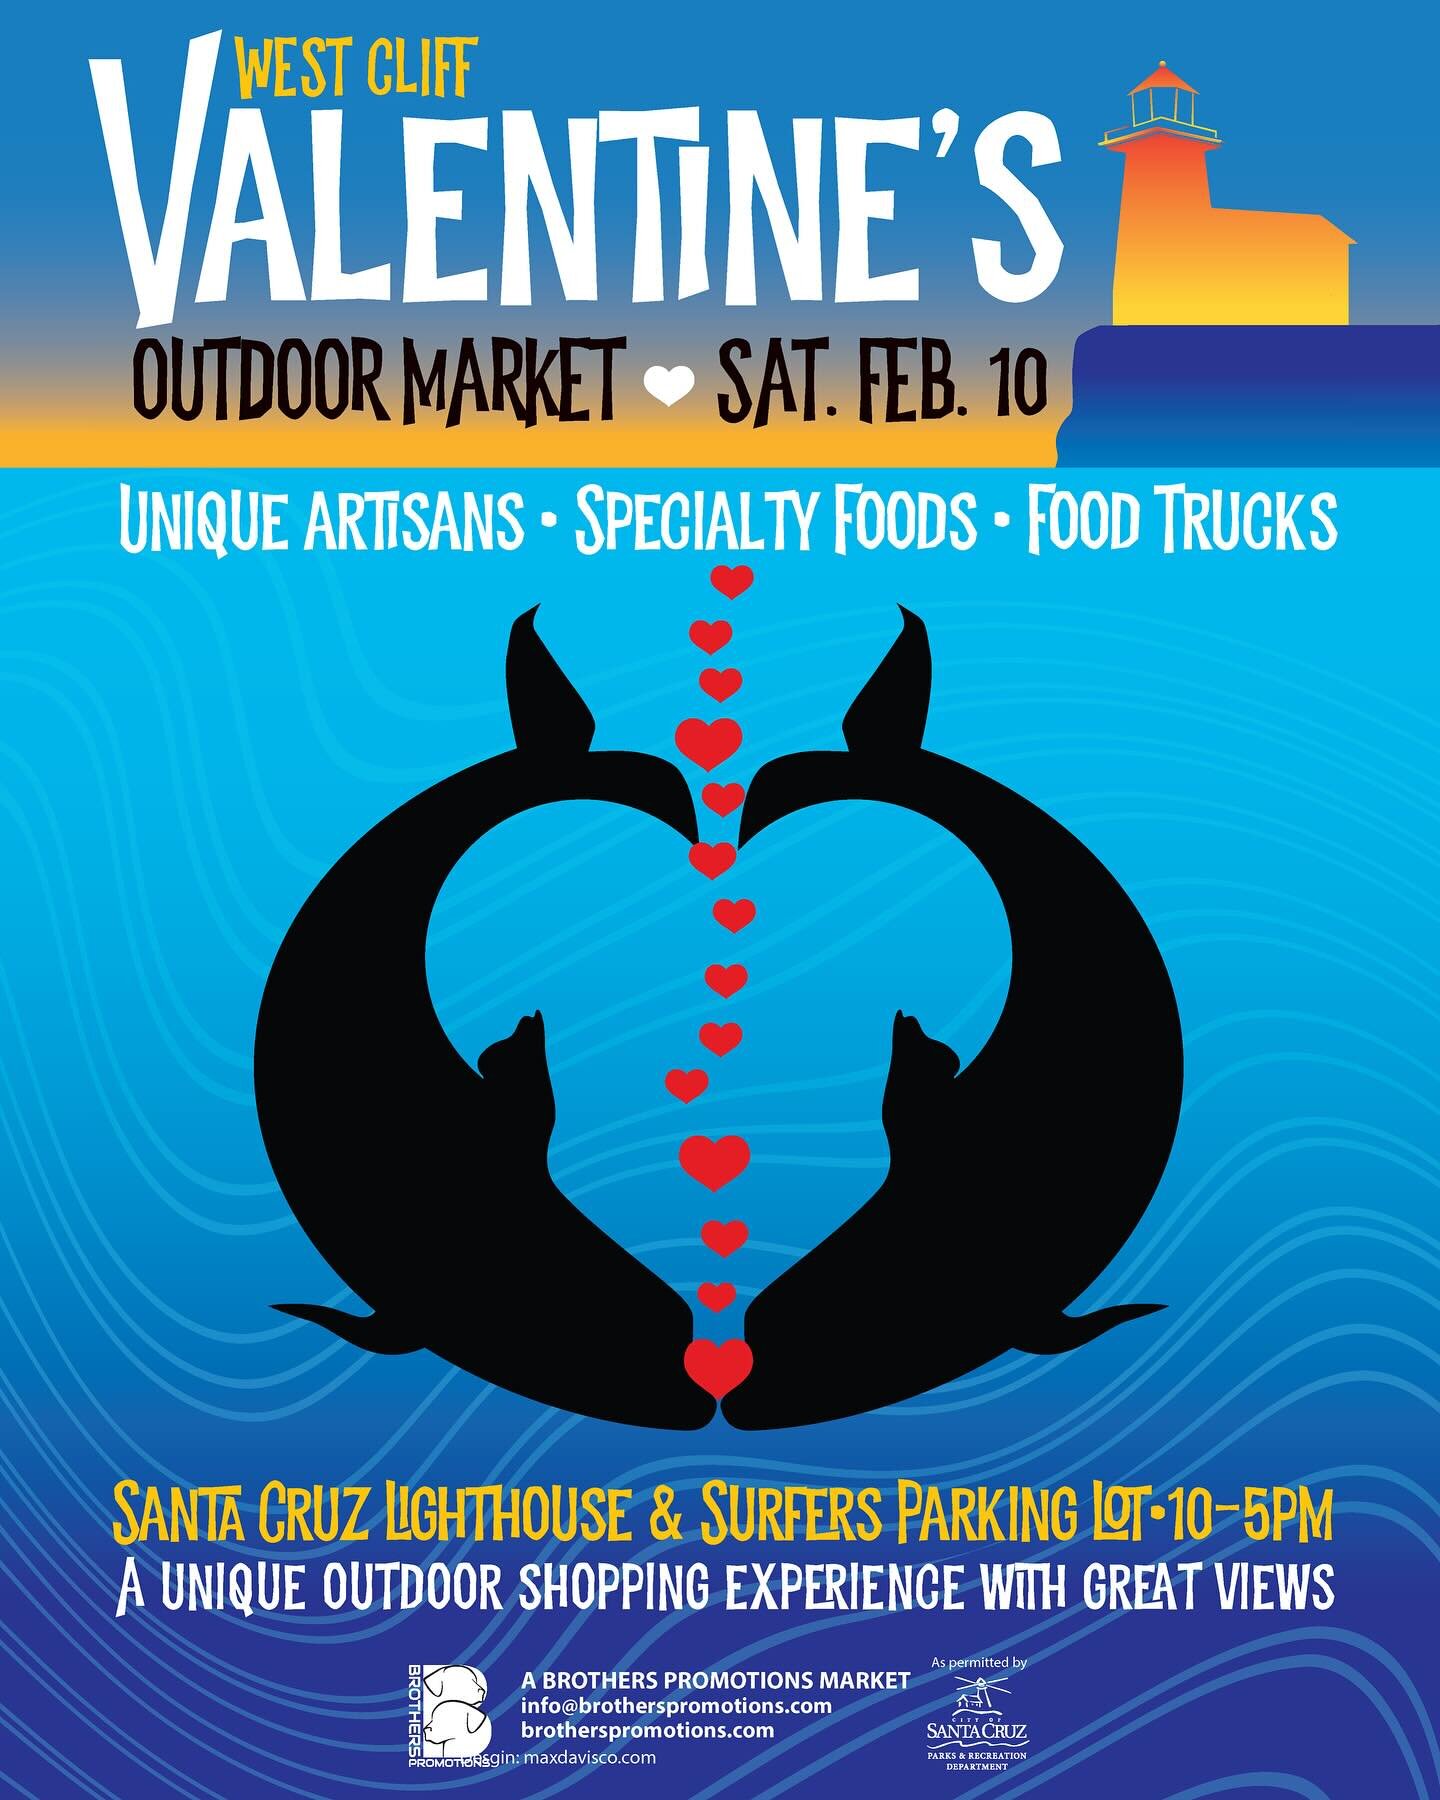 will be at the West Cliff Valentines Outdoor Market in Santa Cruz this Saturday from 10 AM-5 PM! My booth will be located as always by the Surfing Museum at Lighthouse Point. Come by and get some new Art Infused clothing and goods! Hope to see you th